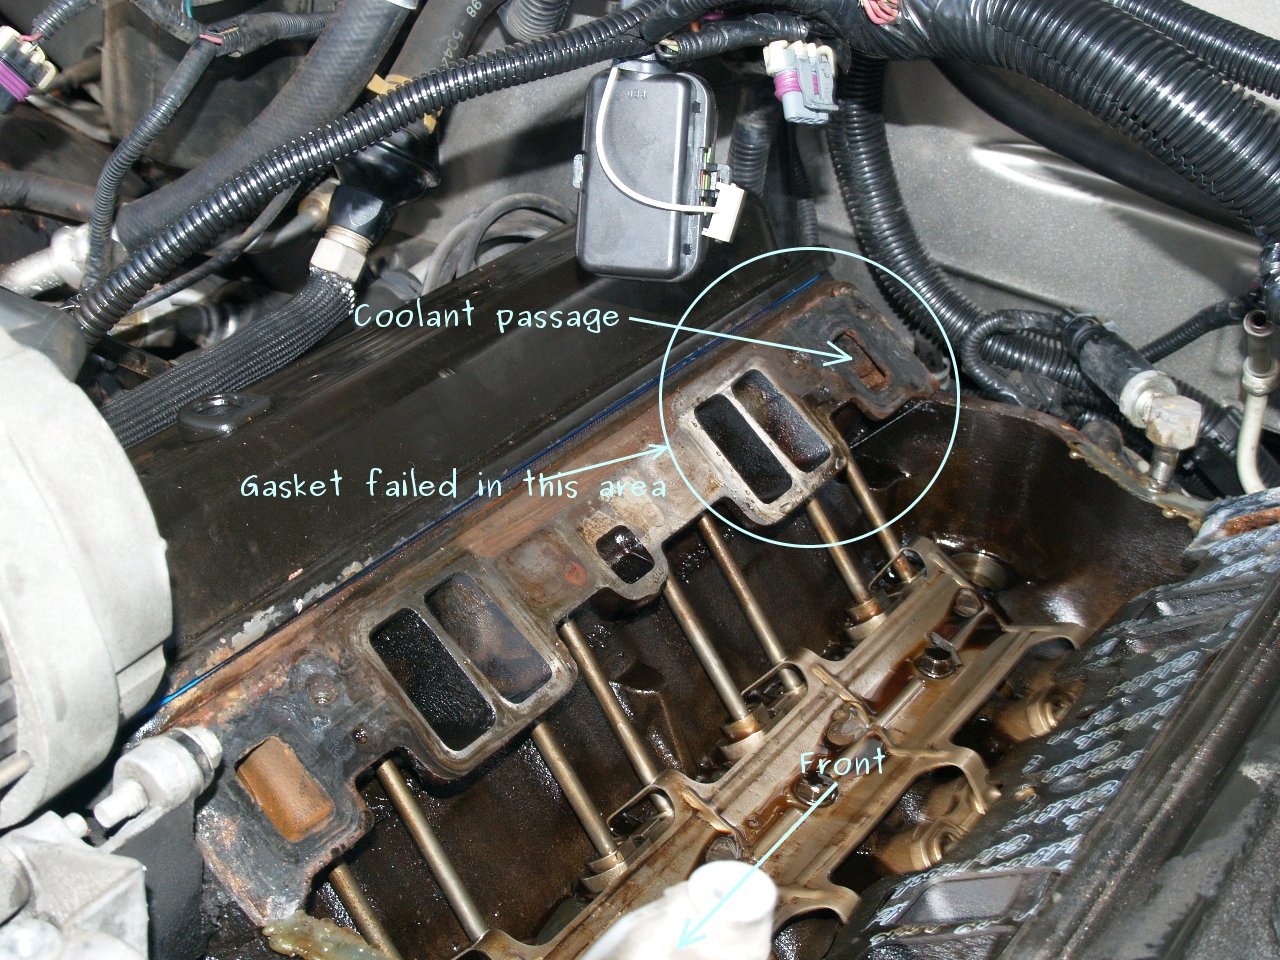 See P0438 in engine